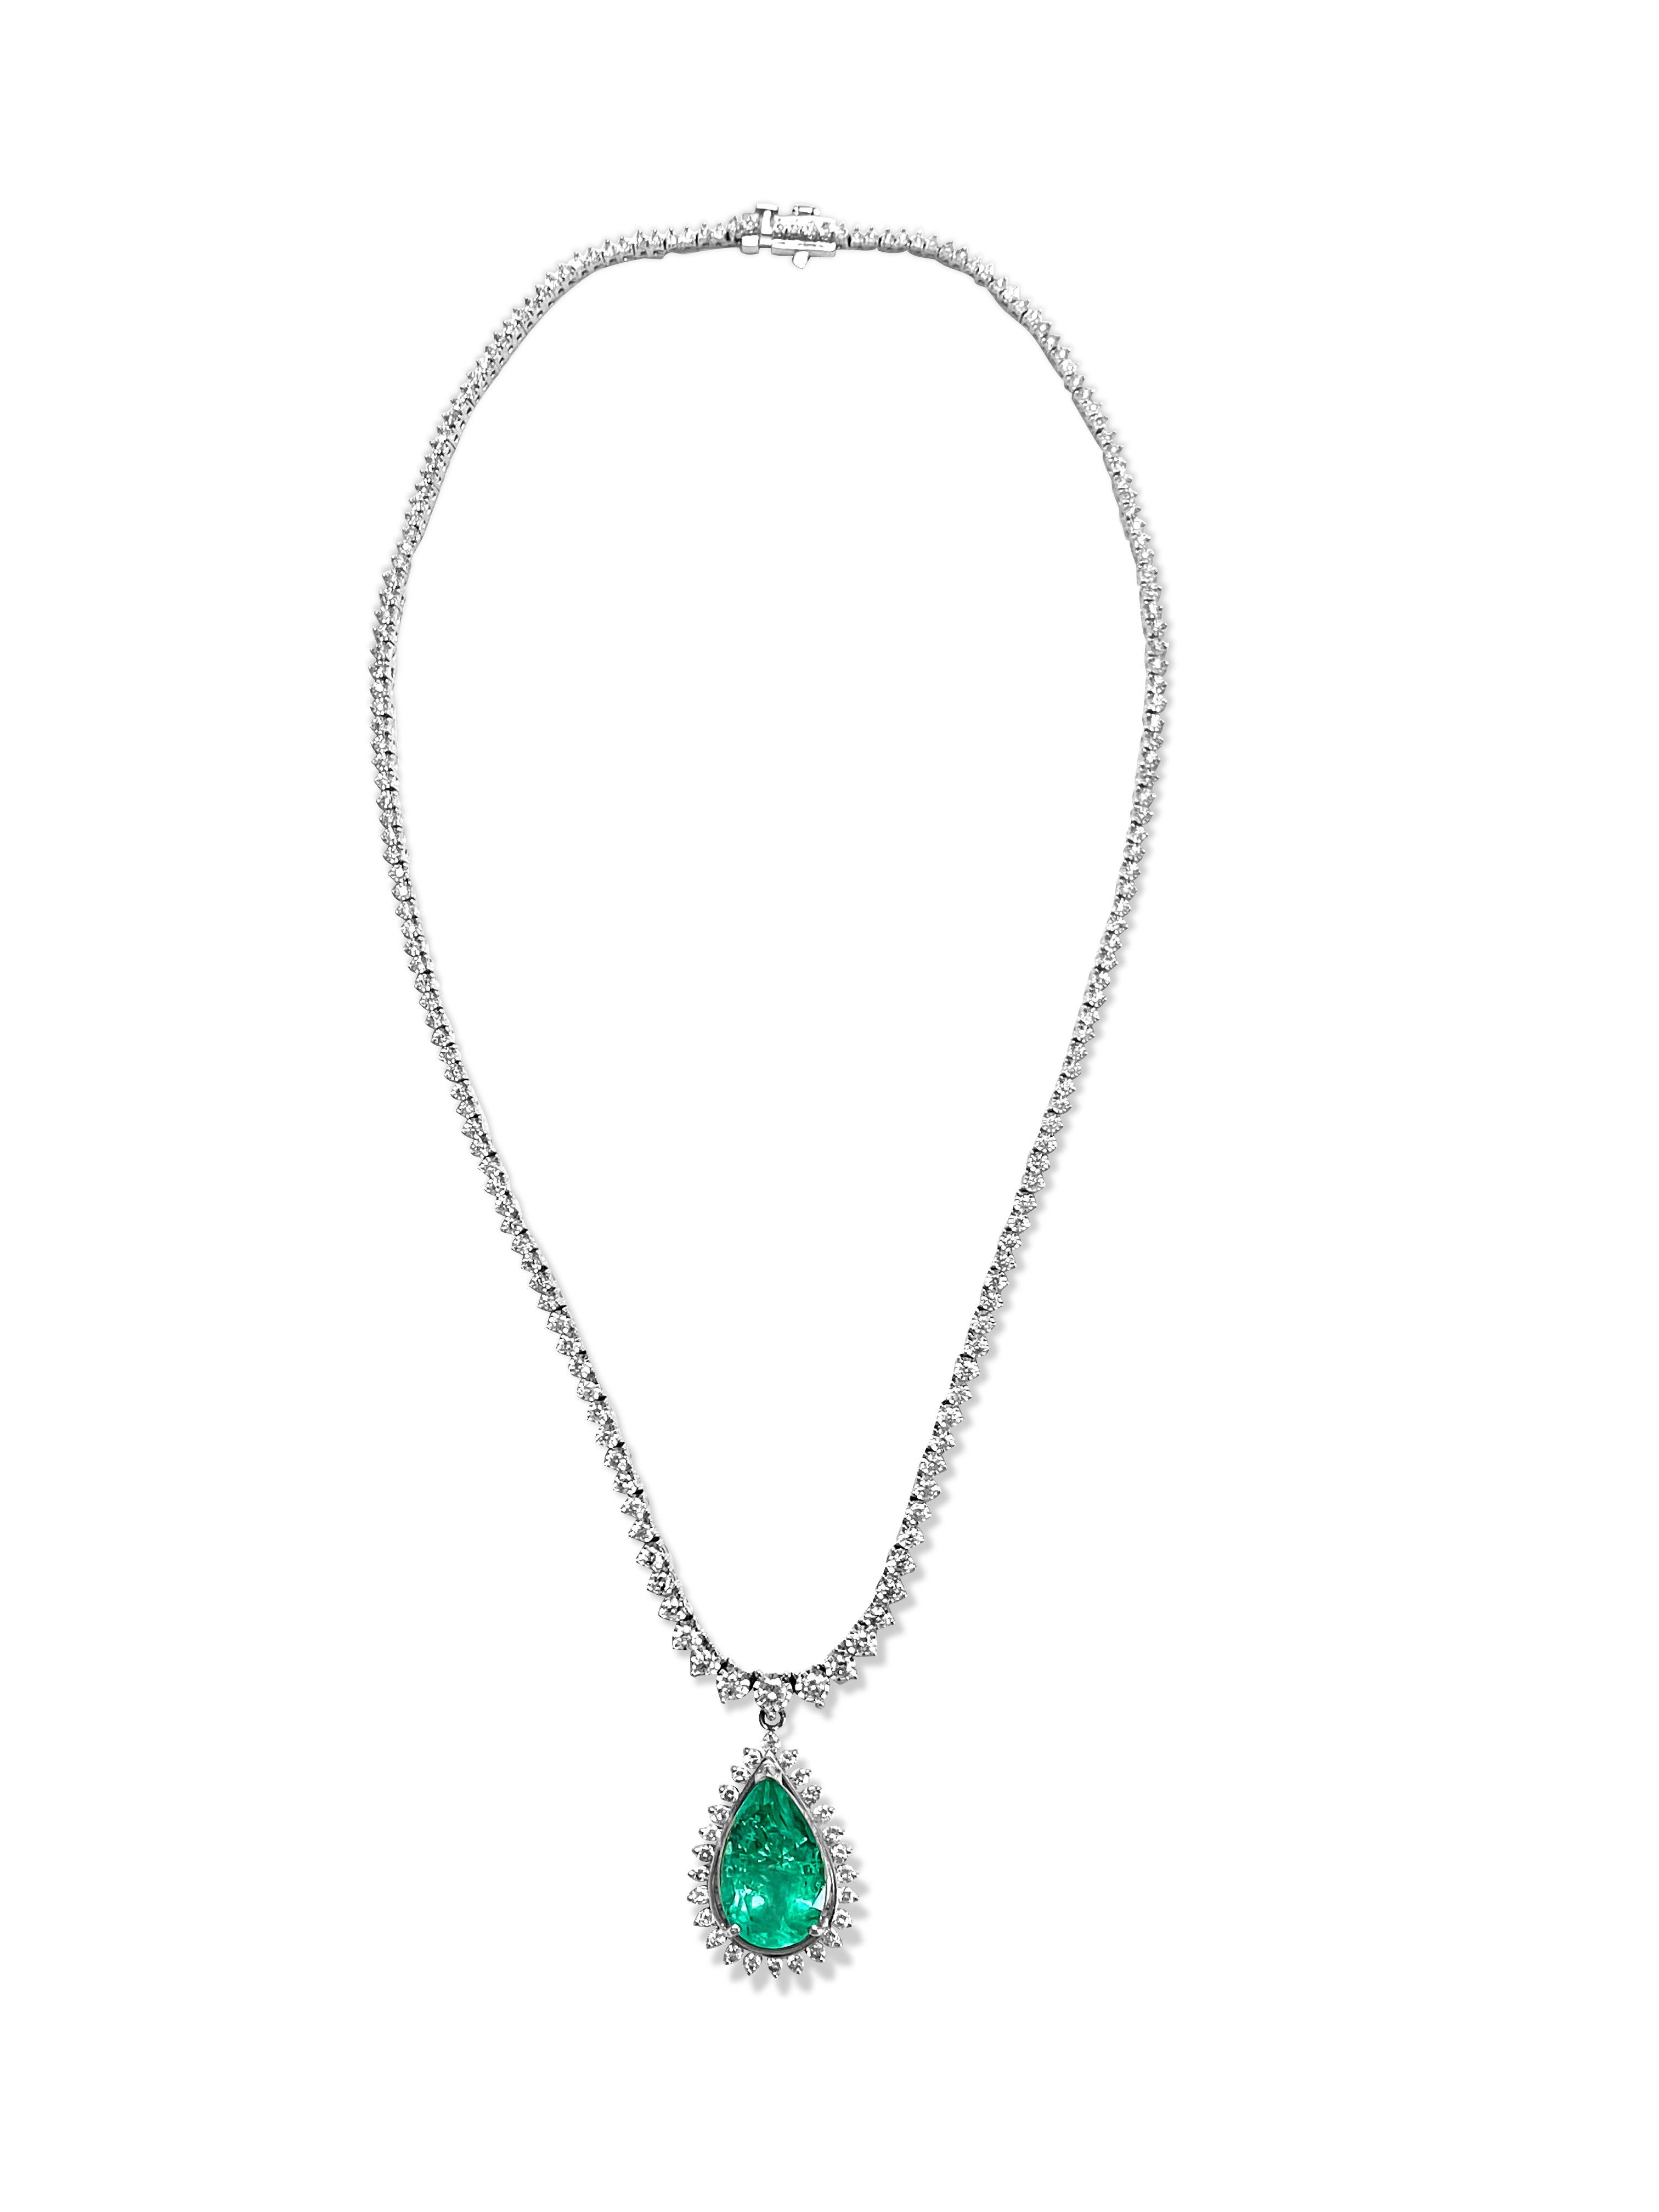 Discover an exquisite piece of jewelry that transcends elegance - a one-of-a-kind women's emerald necklace, meticulously crafted in 14K White Gold. Certified by GIA graduate gemologist, AGI NY, this extraordinary piece holds a retail value estimated